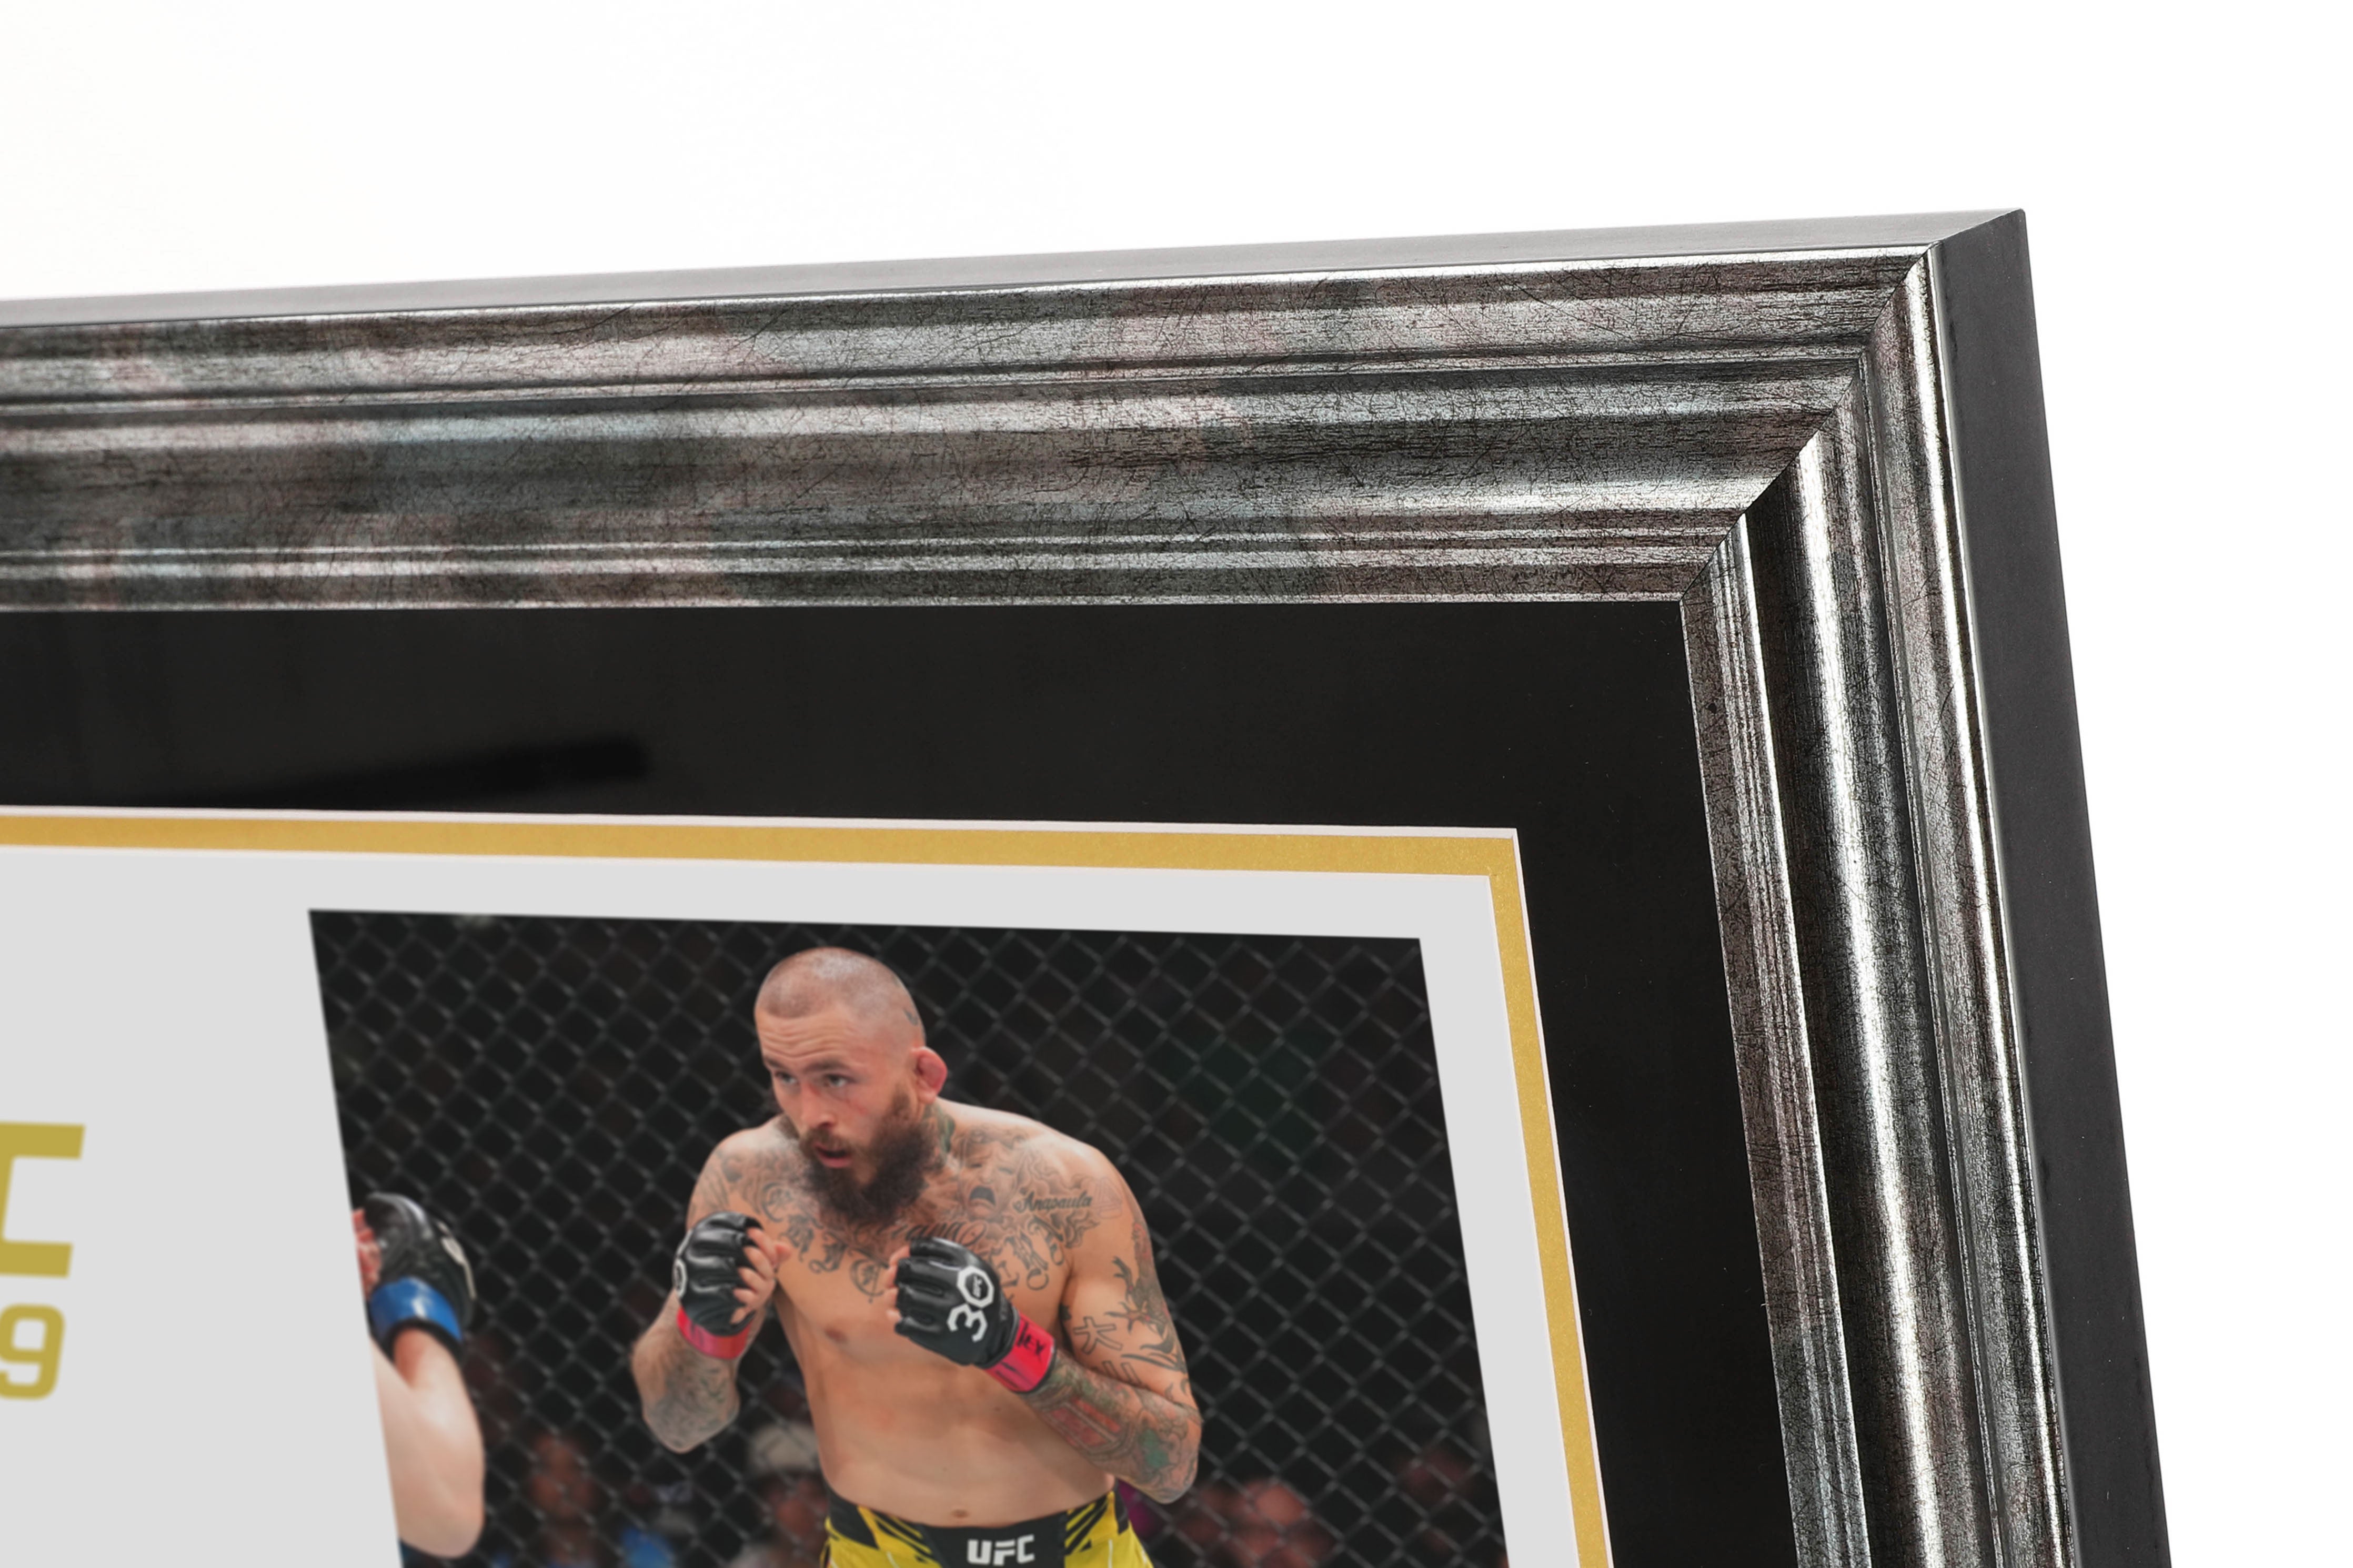 SOLD OUT: UFC 299: O'Malley vs Vera 2 Name on Canvas